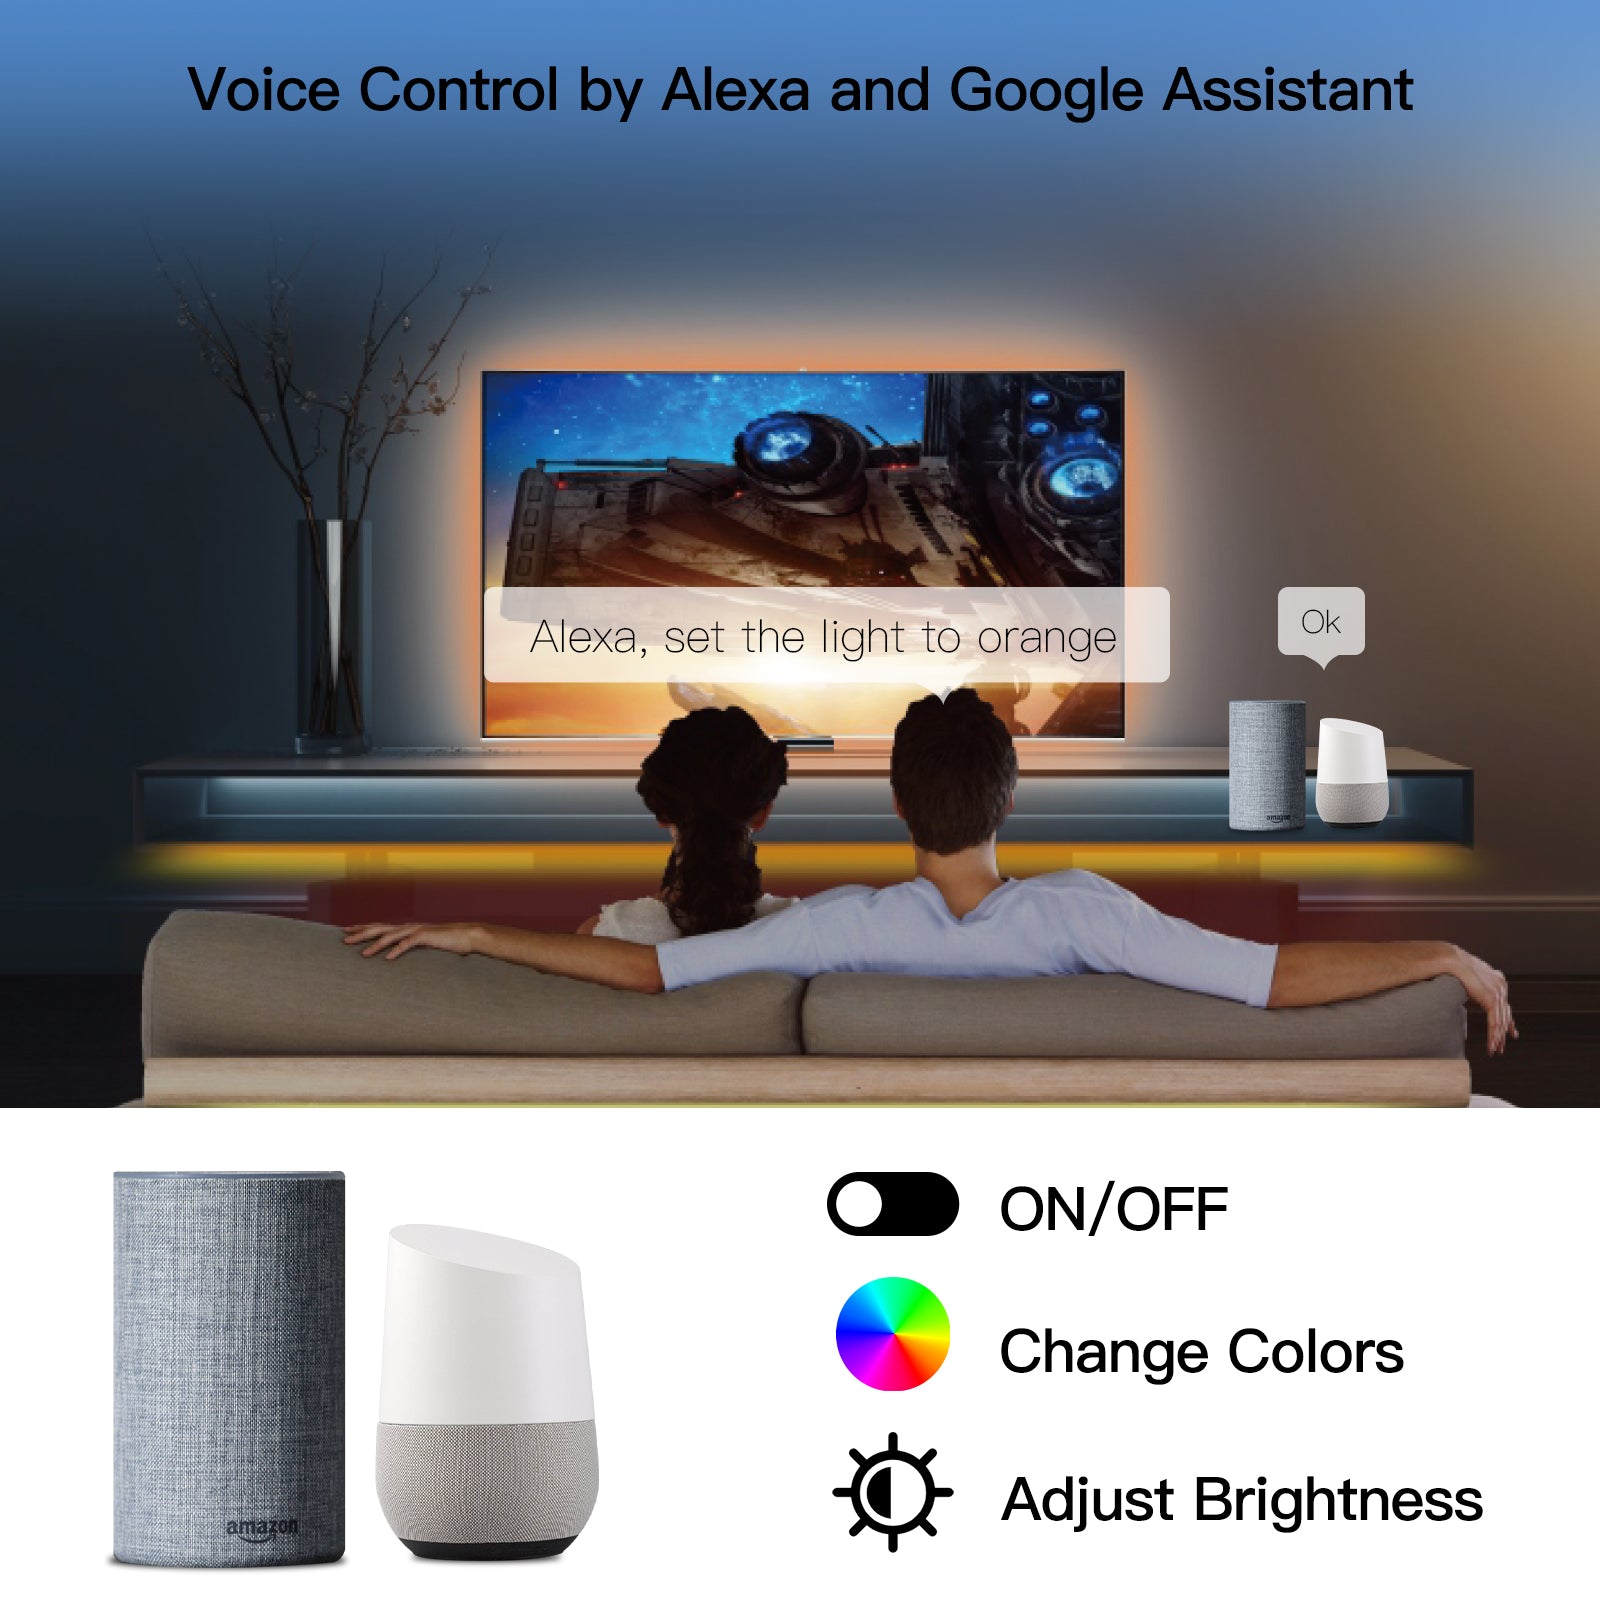 Voice Control by Alexa and Google Assistant